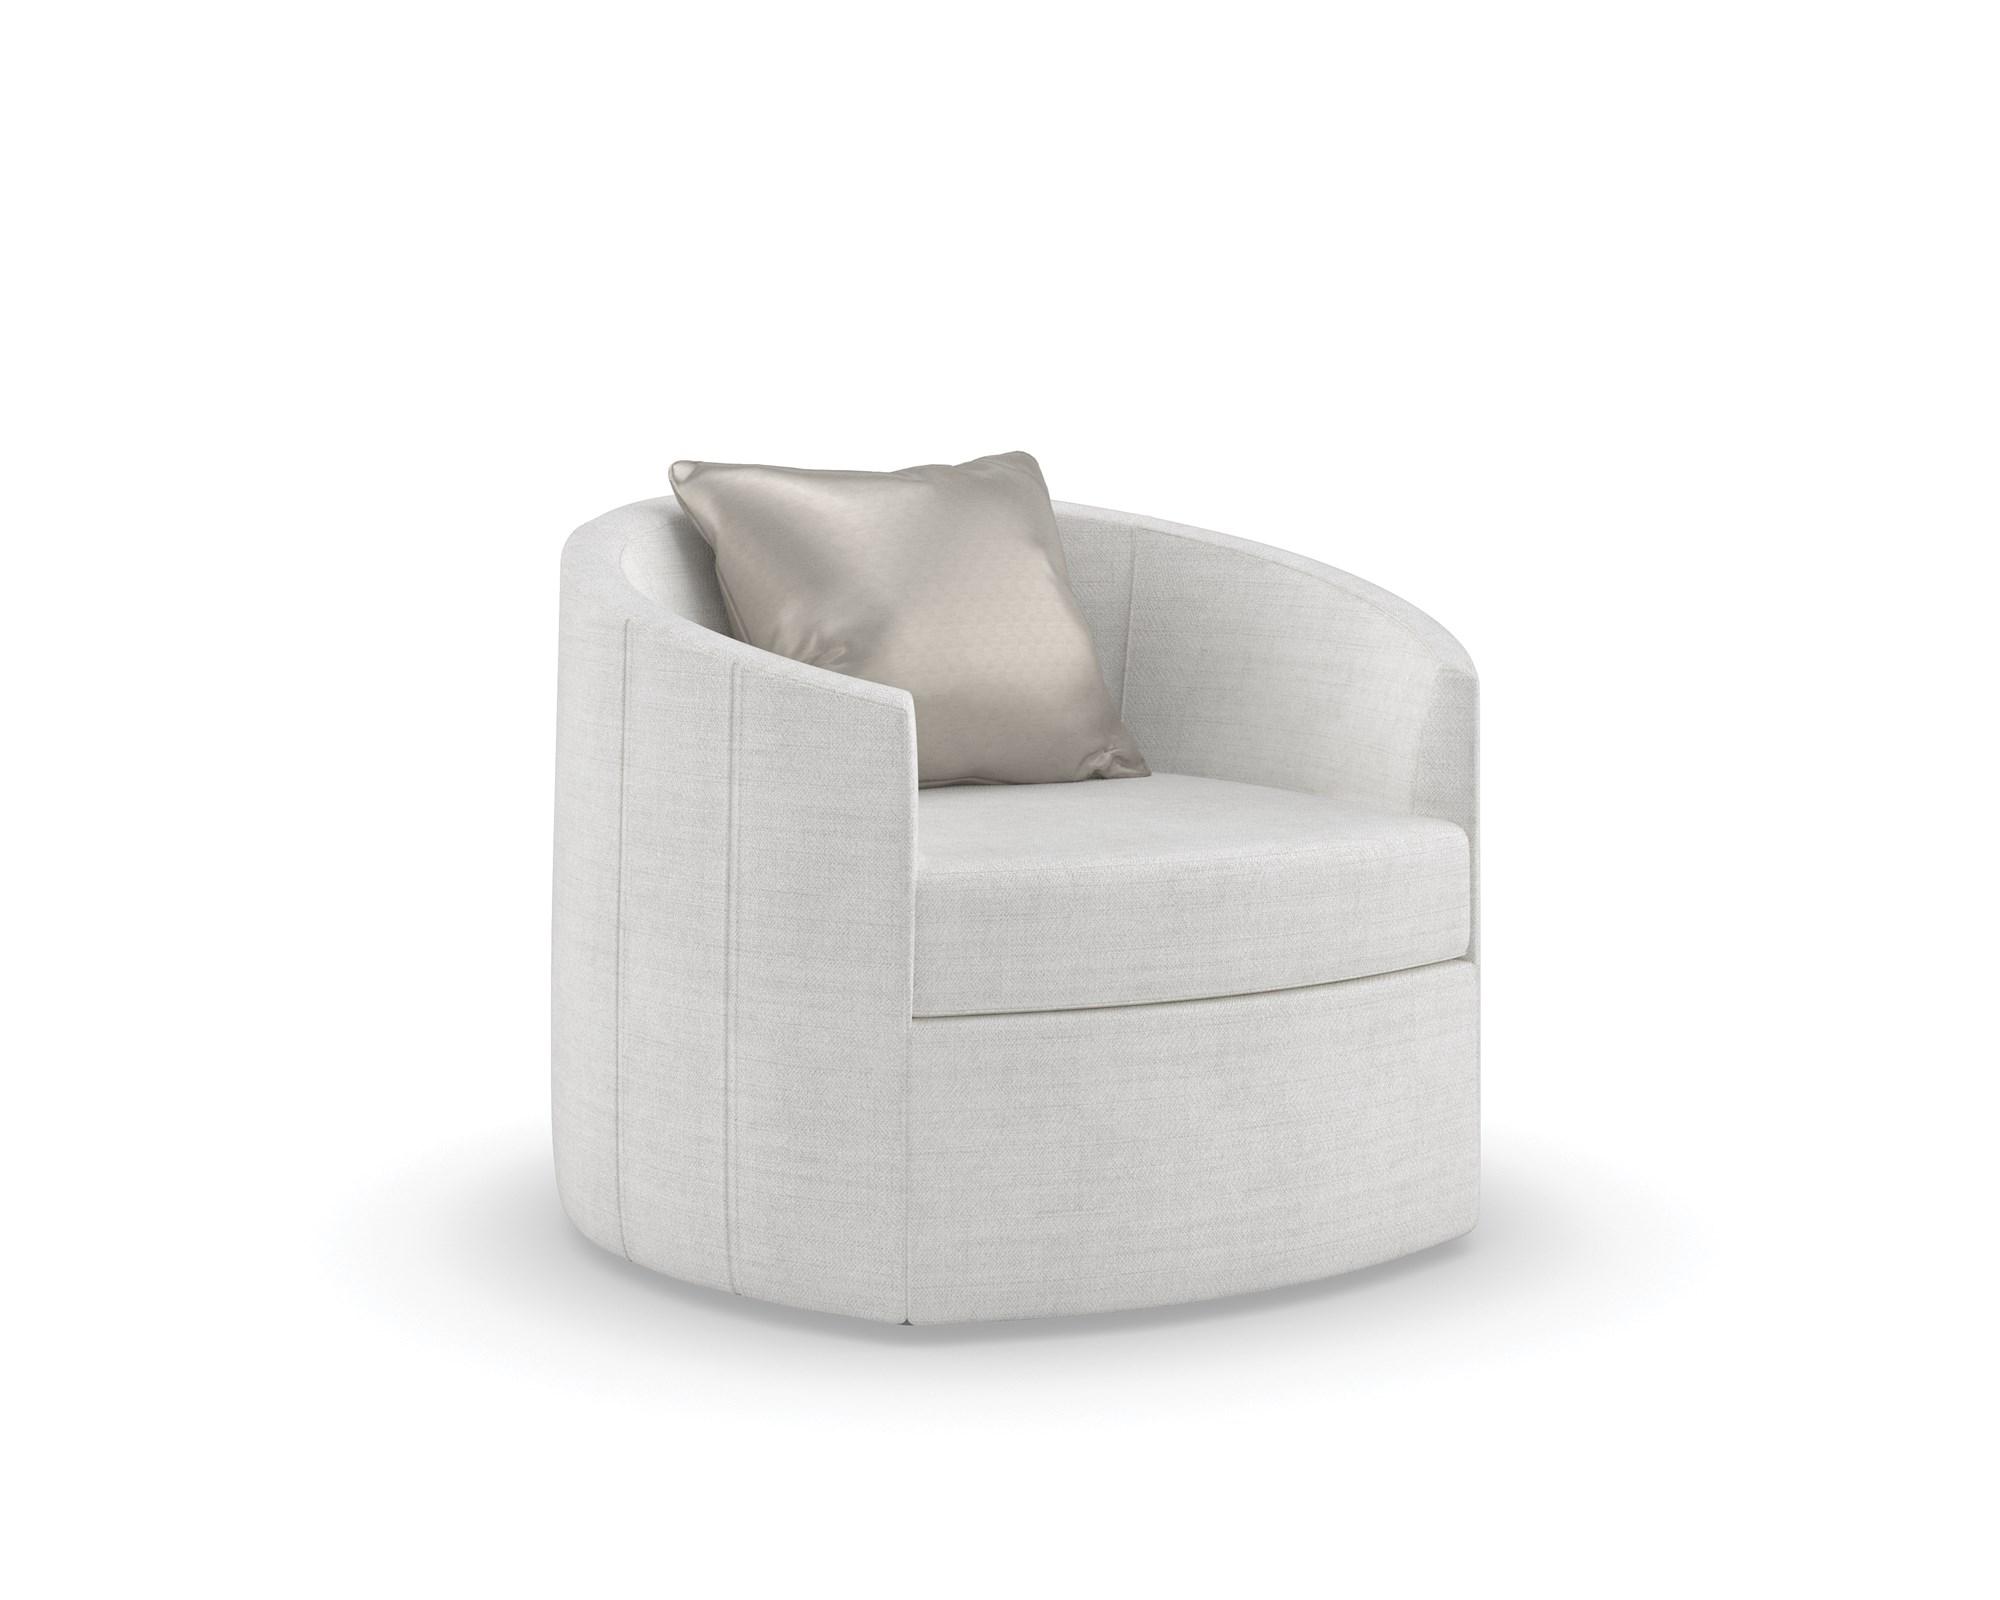 Contemporary Accent Chair YOU COMPLETE ME UPH-021-035-A in Light Gray Fabric